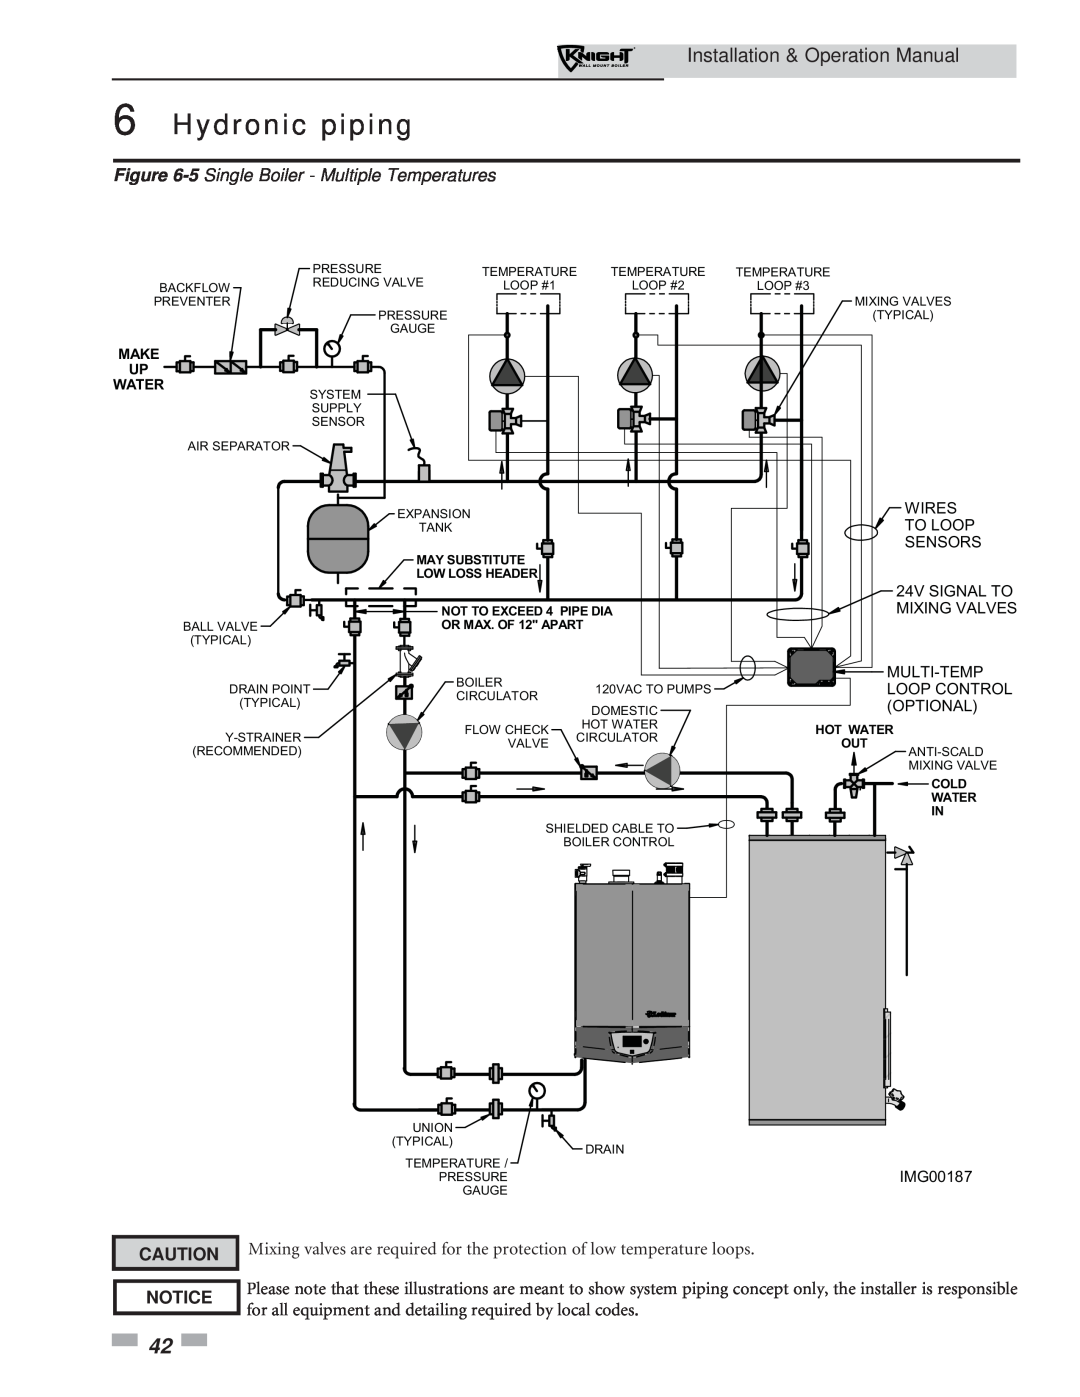 Lochinvar 51-211 5 Single Boiler - Multiple Temperatures, Hydronic piping, Installation & Operation Manual, Wires, To Loop 